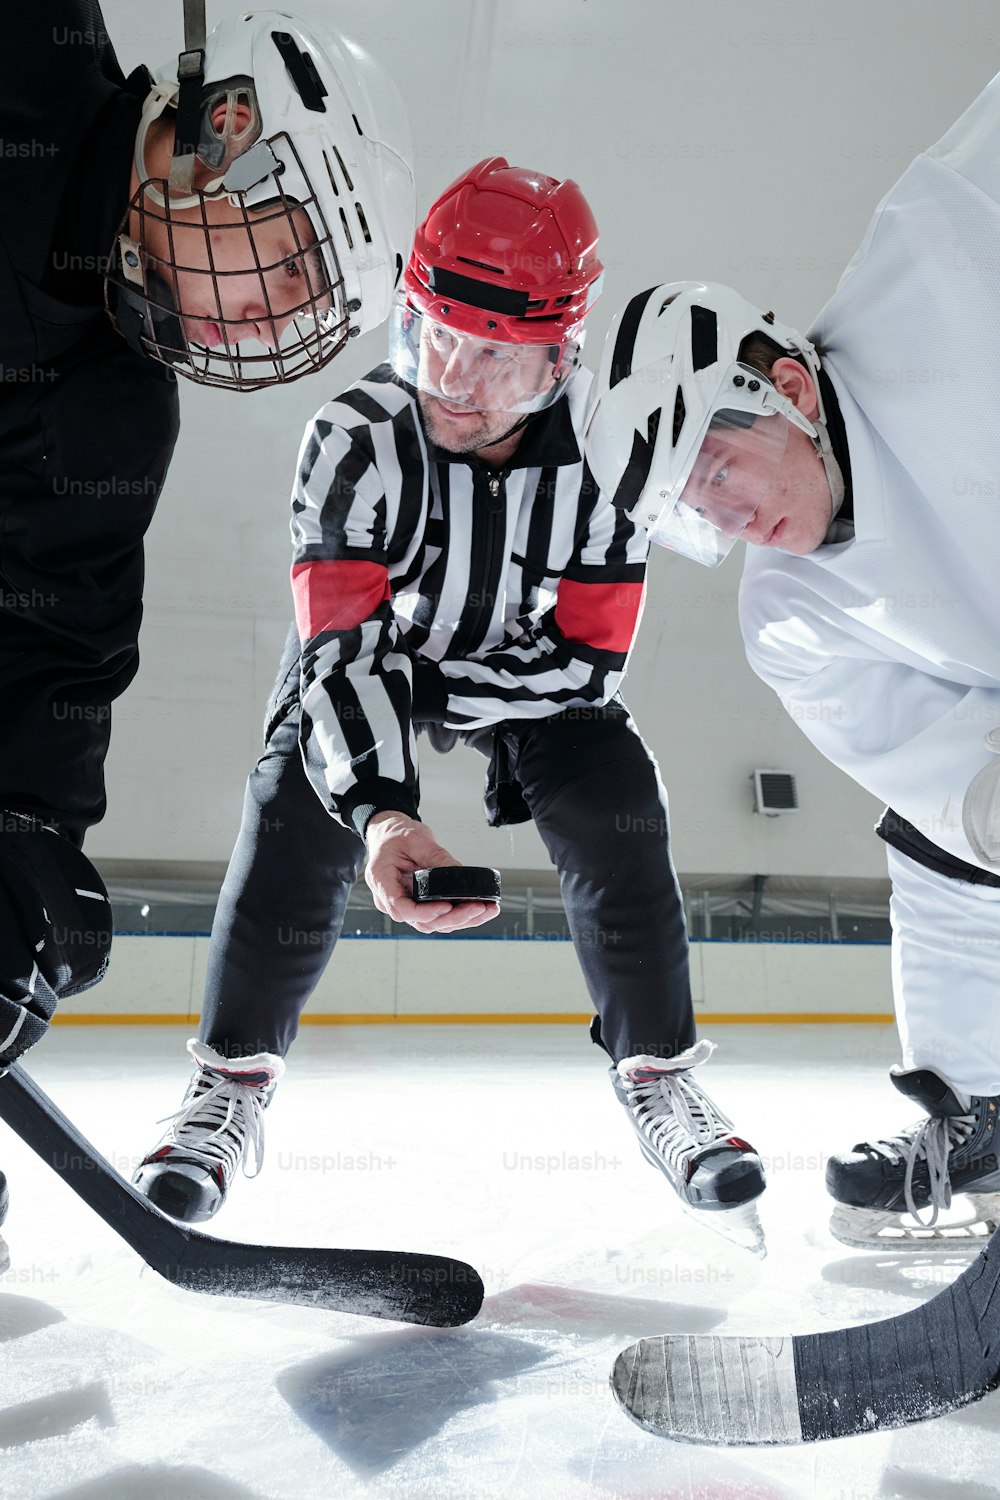 Hockey referee holding puck over ice rink while two rivals with sticks looking at it while preparing to shoot it during training